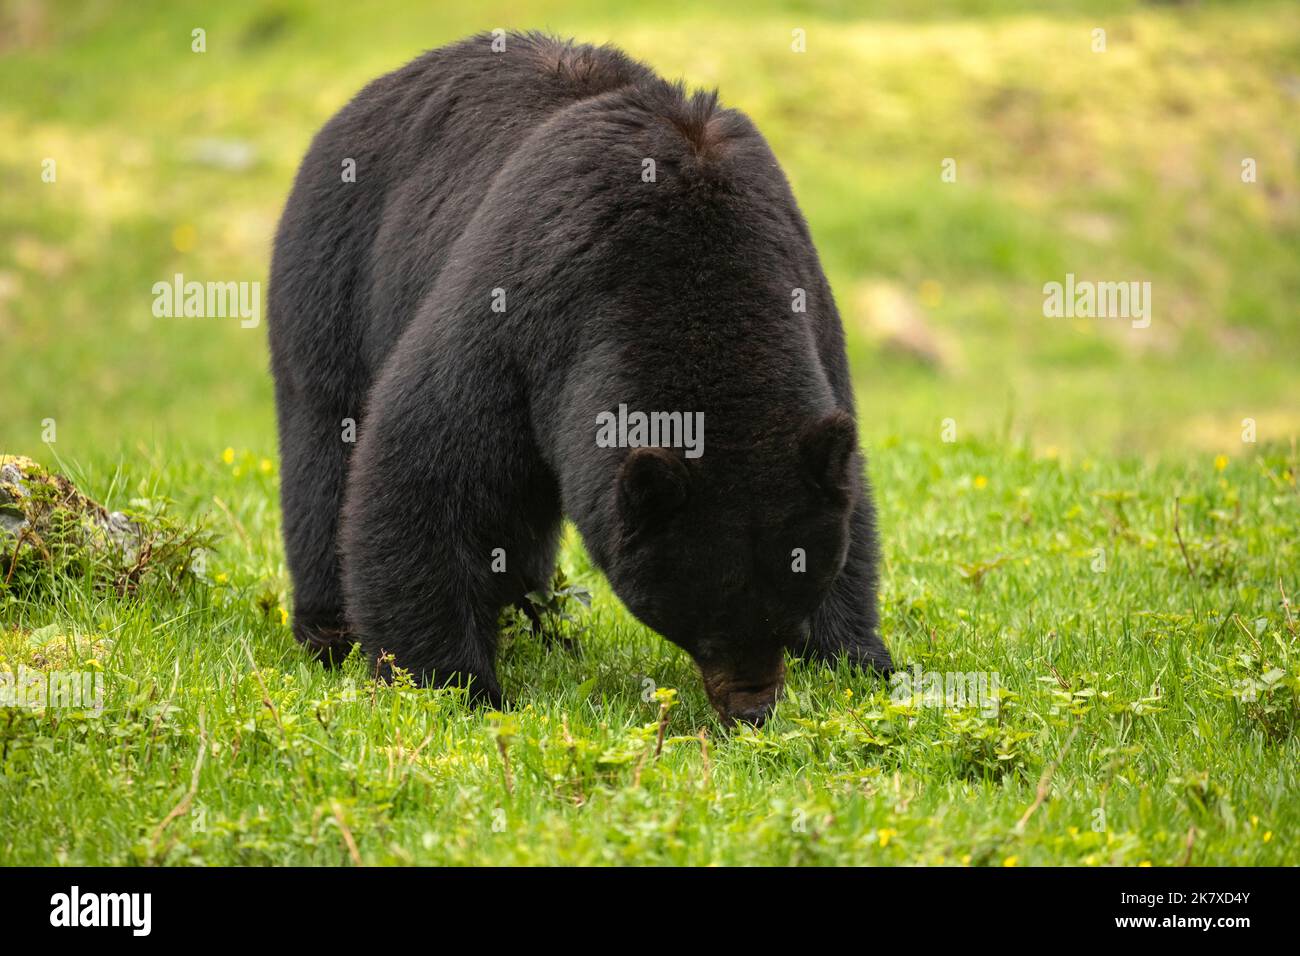 WA22380-00...WASHINGTON - A black bear, recently out of winter hibernation, hungerly eating grass and leaves in the Enchanted Valley of Olympic Nation Stock Photo